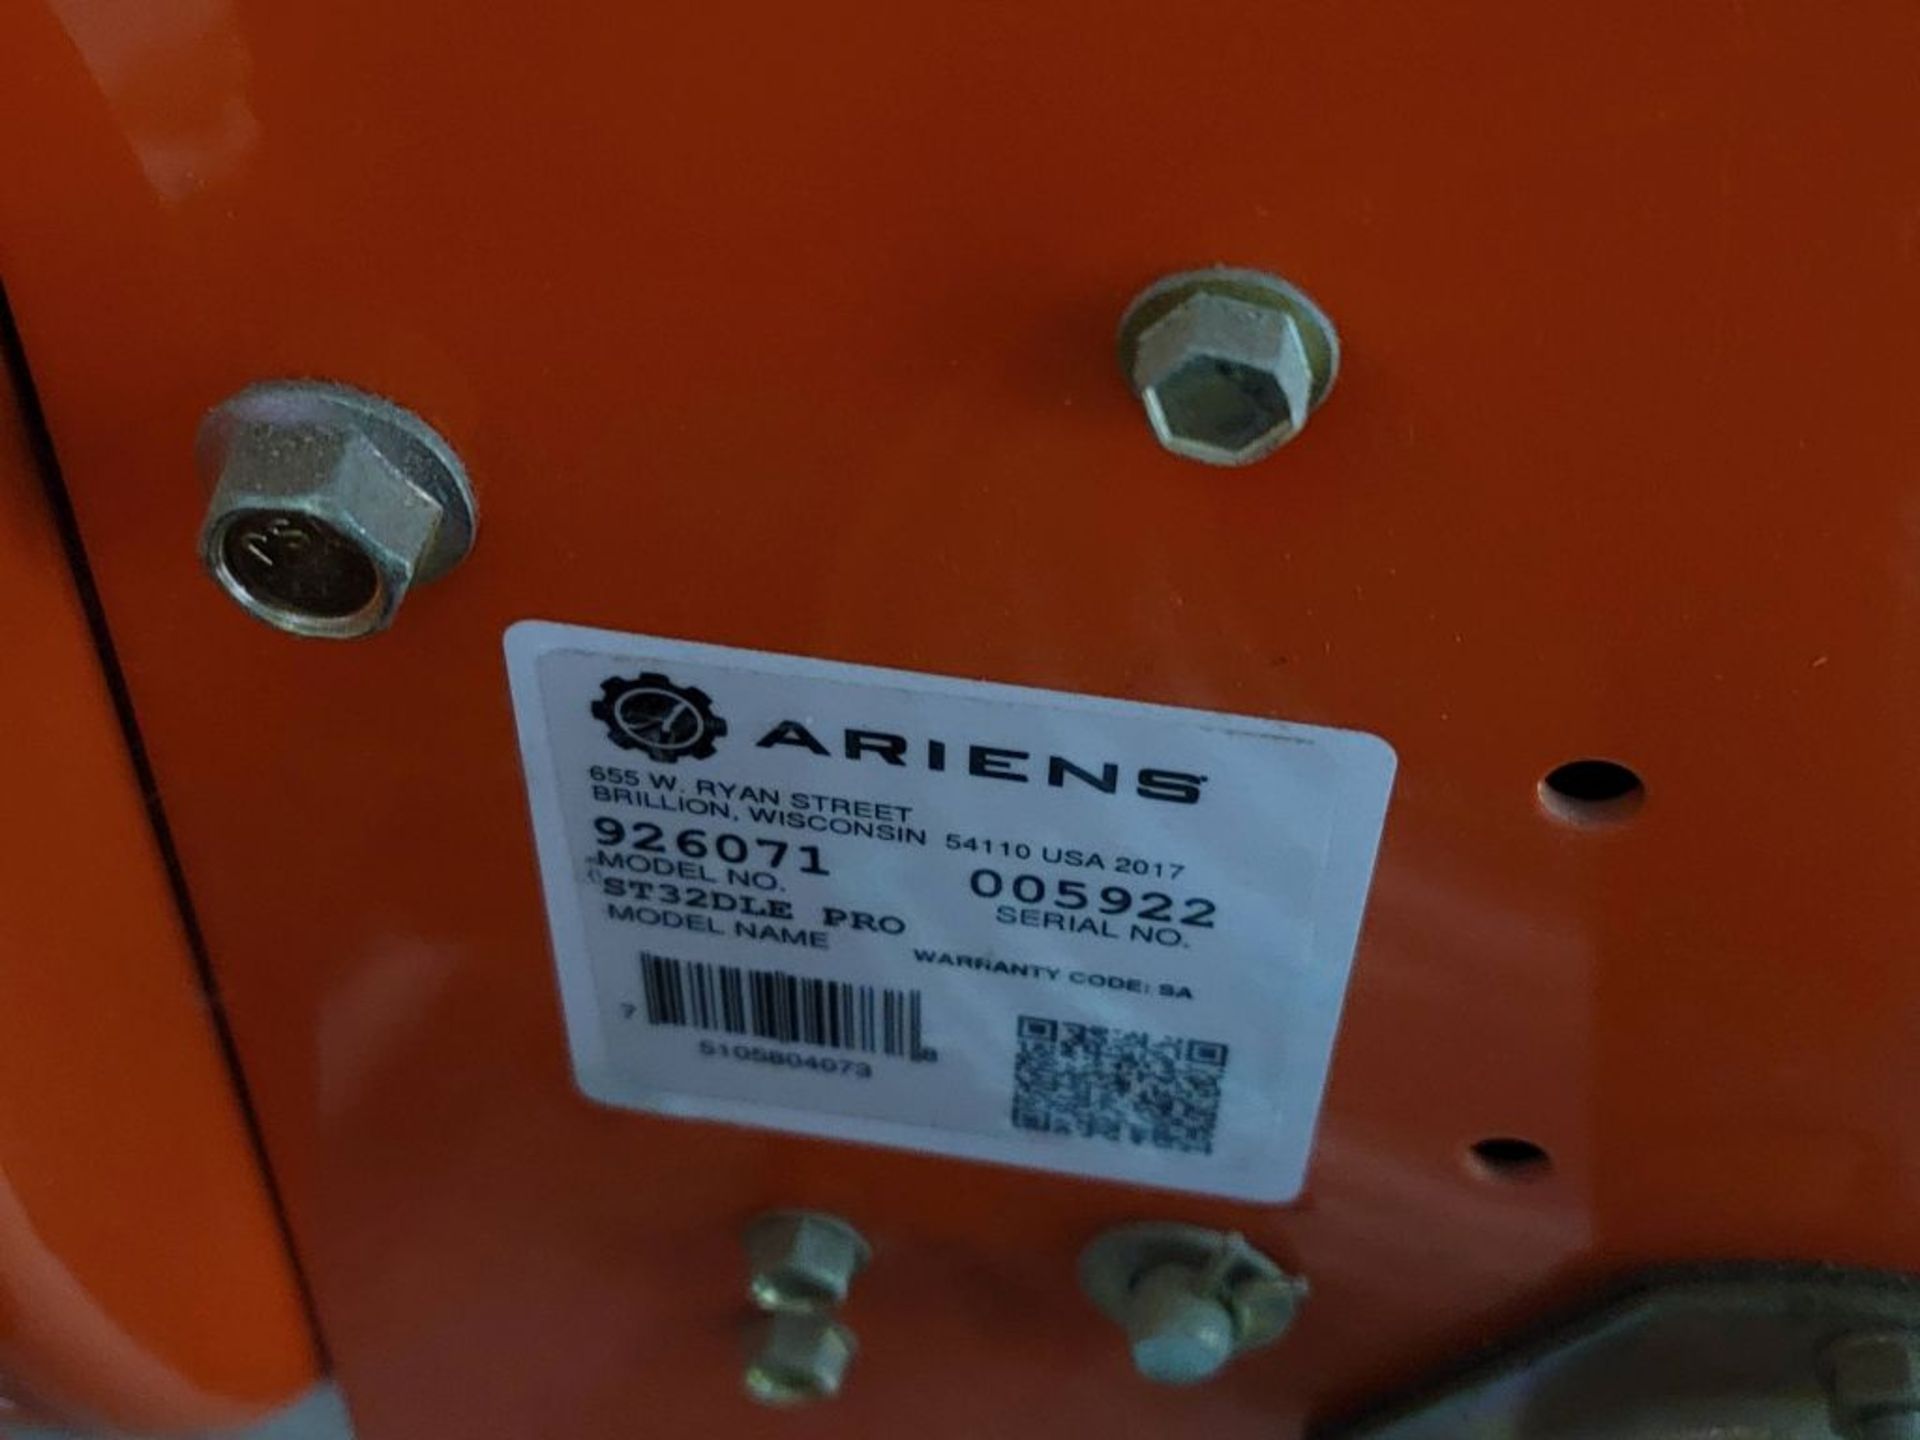 Ariens Snow Blower | 420cc Motor; Model No. 926071; Model Name ST32DLE PRO - Image 10 of 10